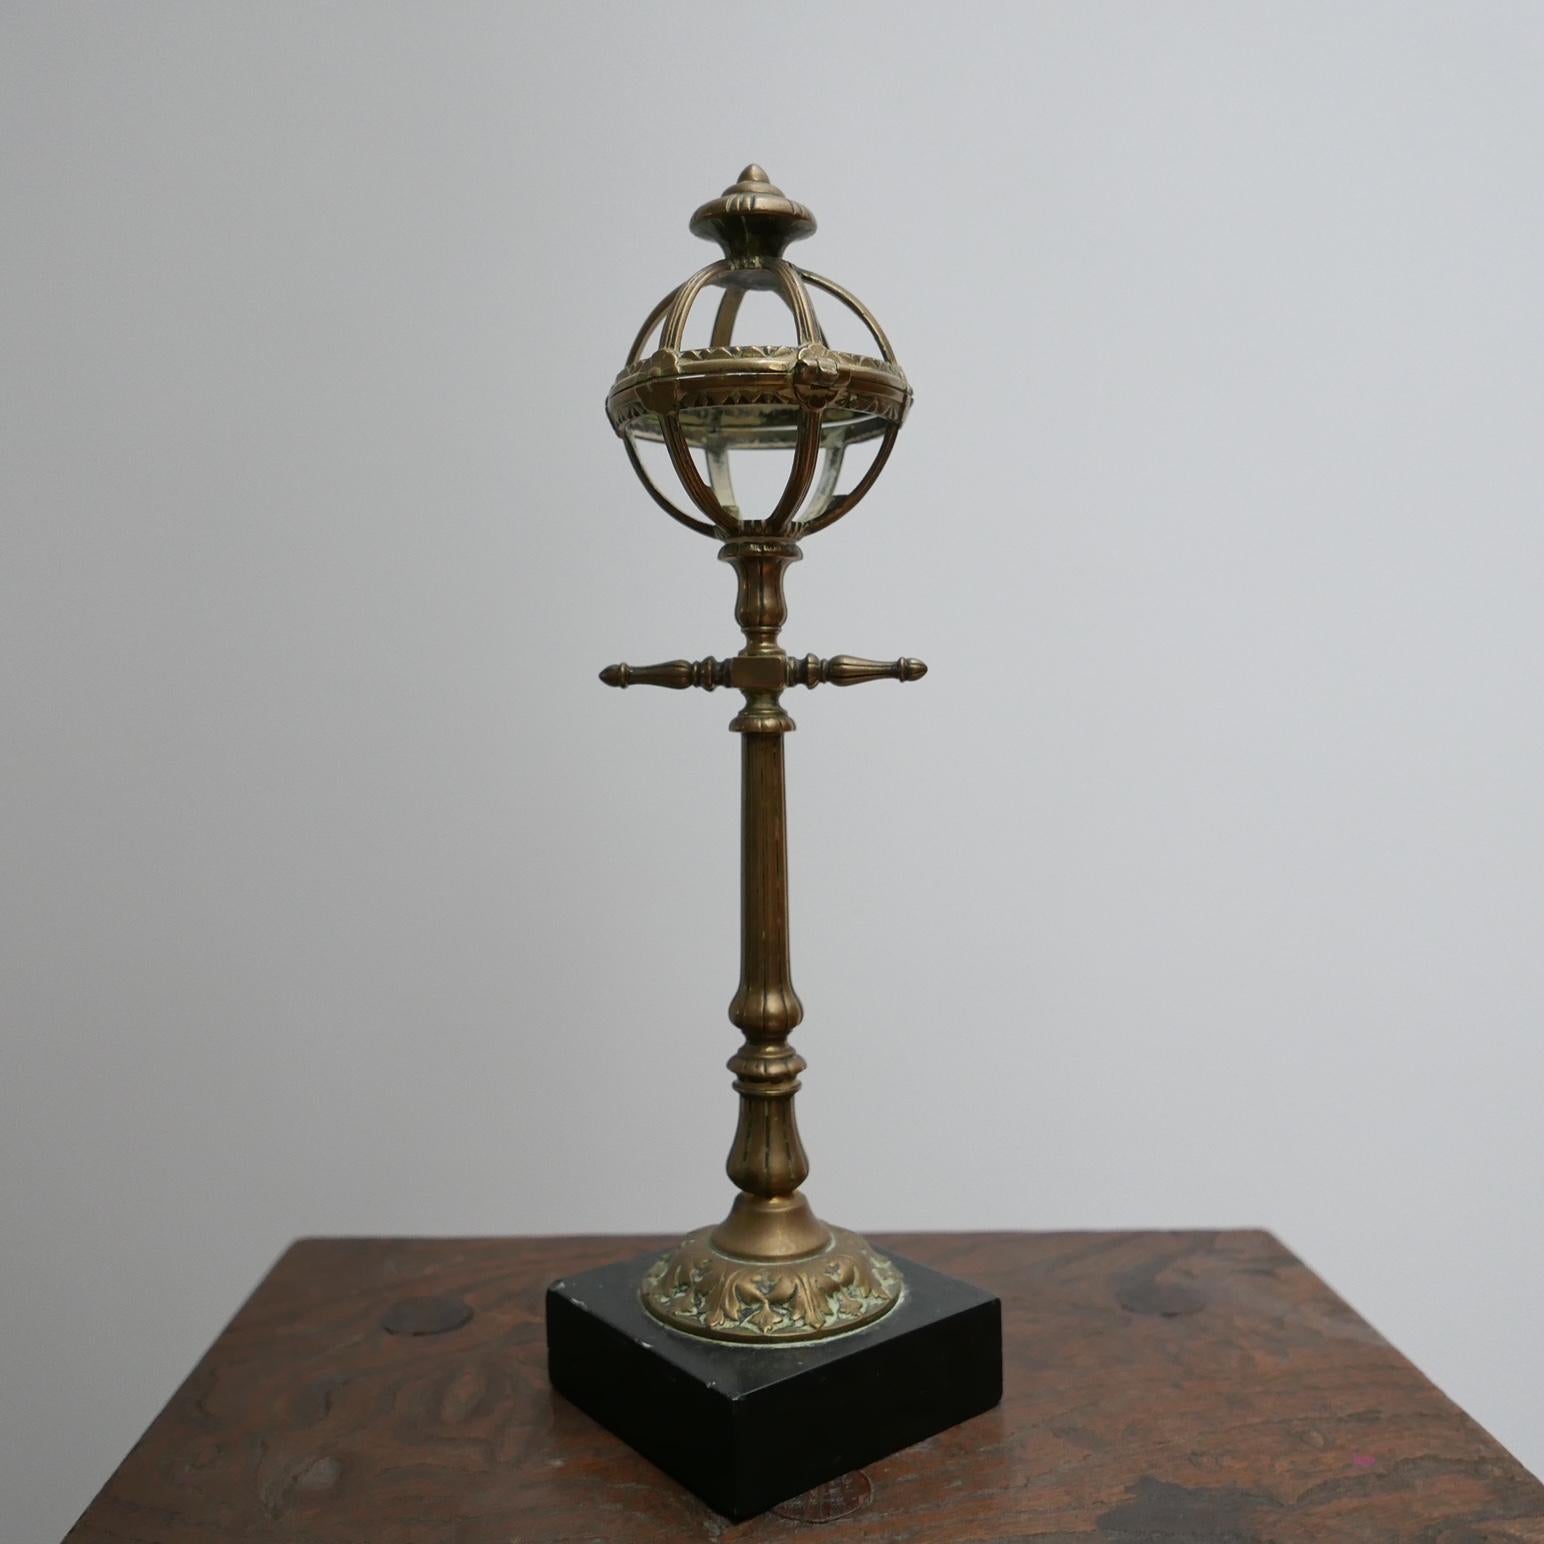 An unusual brass desk top, mantelpiece or shelf curio. 

Likely England or France, c1900s. 

Raised over a black marble bass, this details desk top model of a street lantern has a hinged lid. 

Location: London Gallery. 

Dimensions: 32 H x